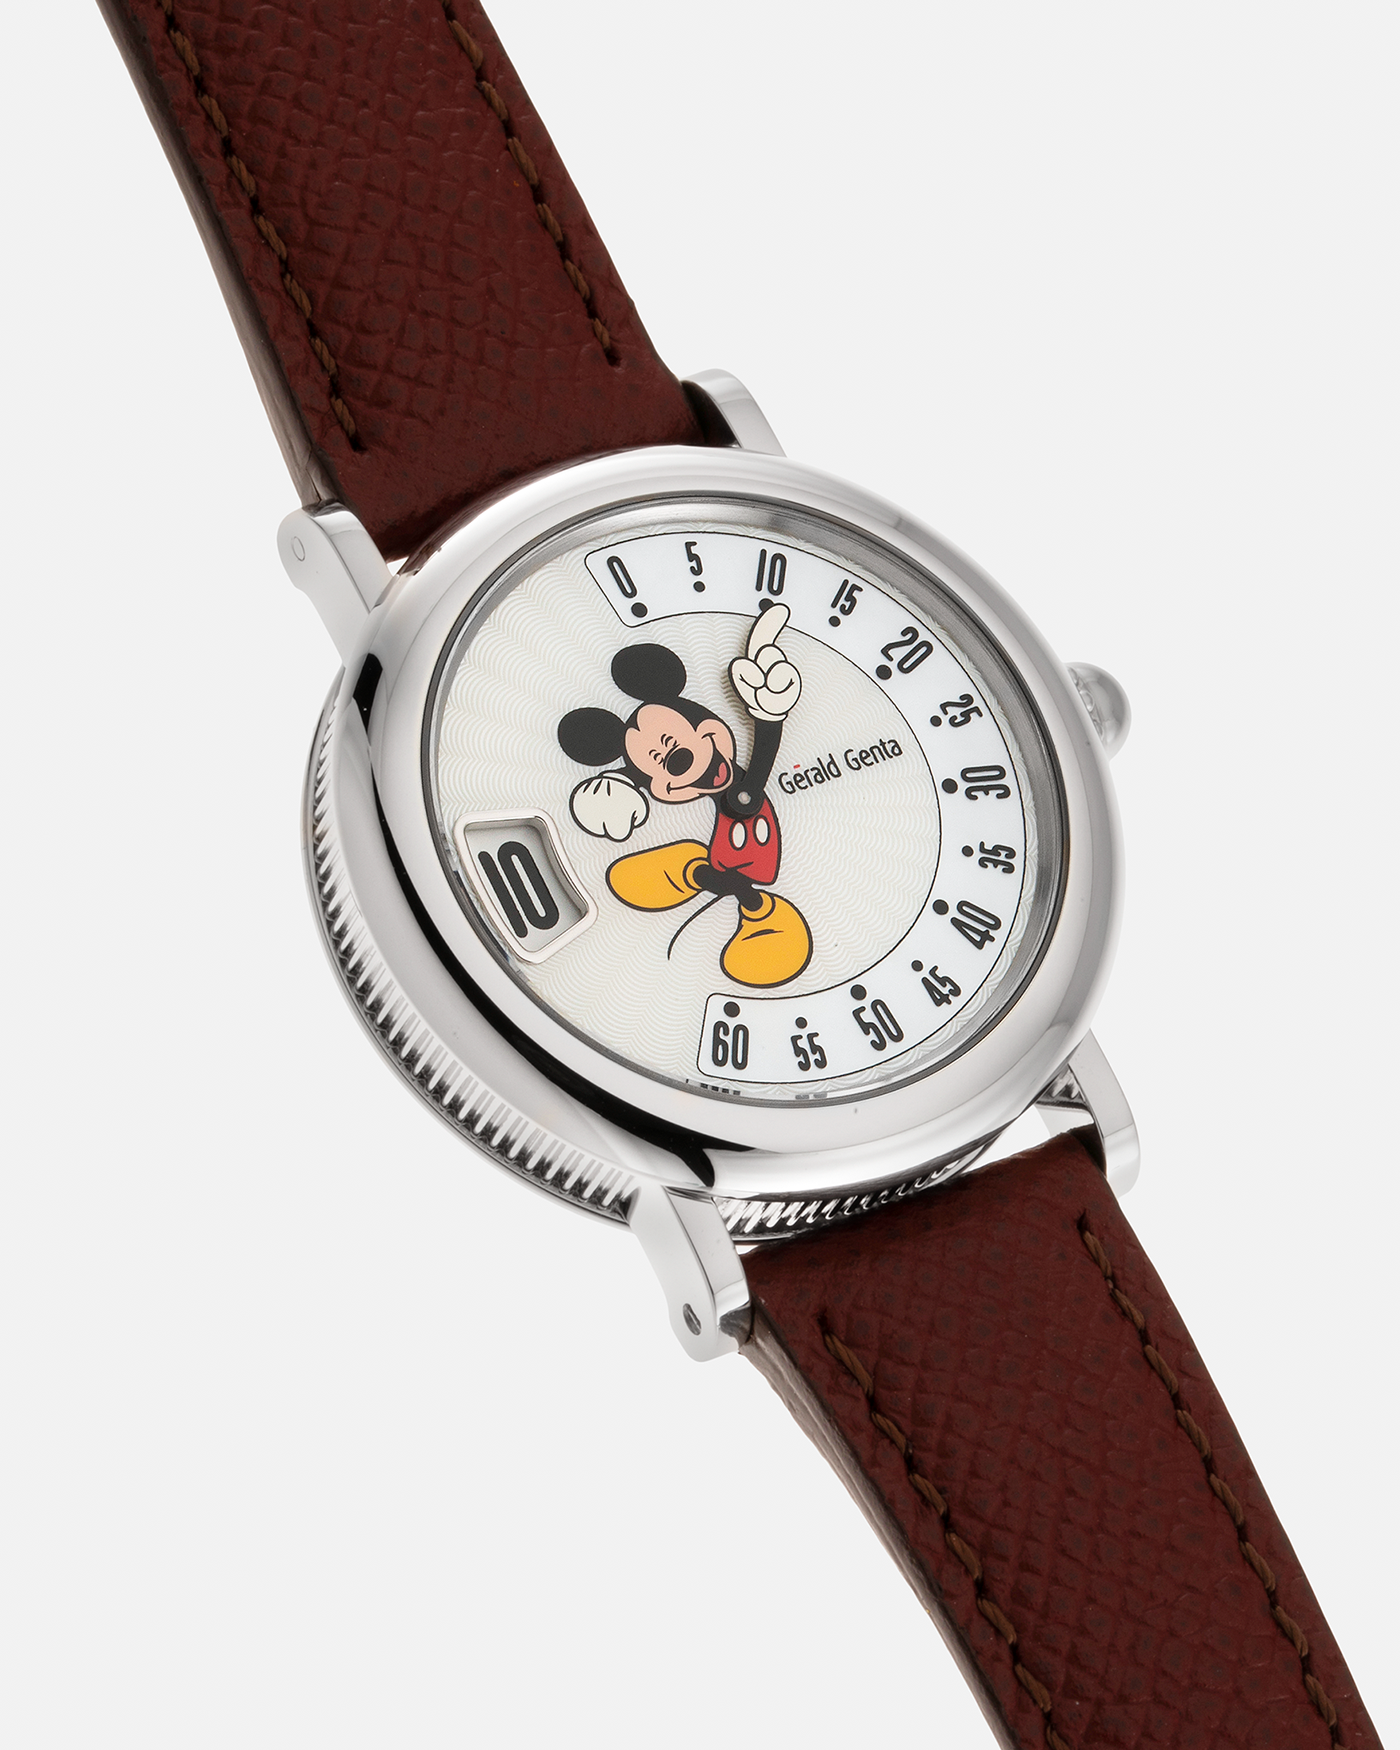 Brand: Gérald Genta Year: 2008 Model: Retro Fantasy ‘Mickey Mouse’ Reference Number: Ref.M.10.065.CR.BA Serial Number: 105XXX Material: Stainless Steel Case, Mother-of-Pearl dial Movement: Cal. ETA 2892A2, Self-Winding Case Diameter: 36mm Lug Width: 18mm Strap: Generic Oxblood Lizard Leather Strap with Signed Stainless Steel Tang Buckle, with additional Gérald Genta Burgundy Red Alligator Leather Strap